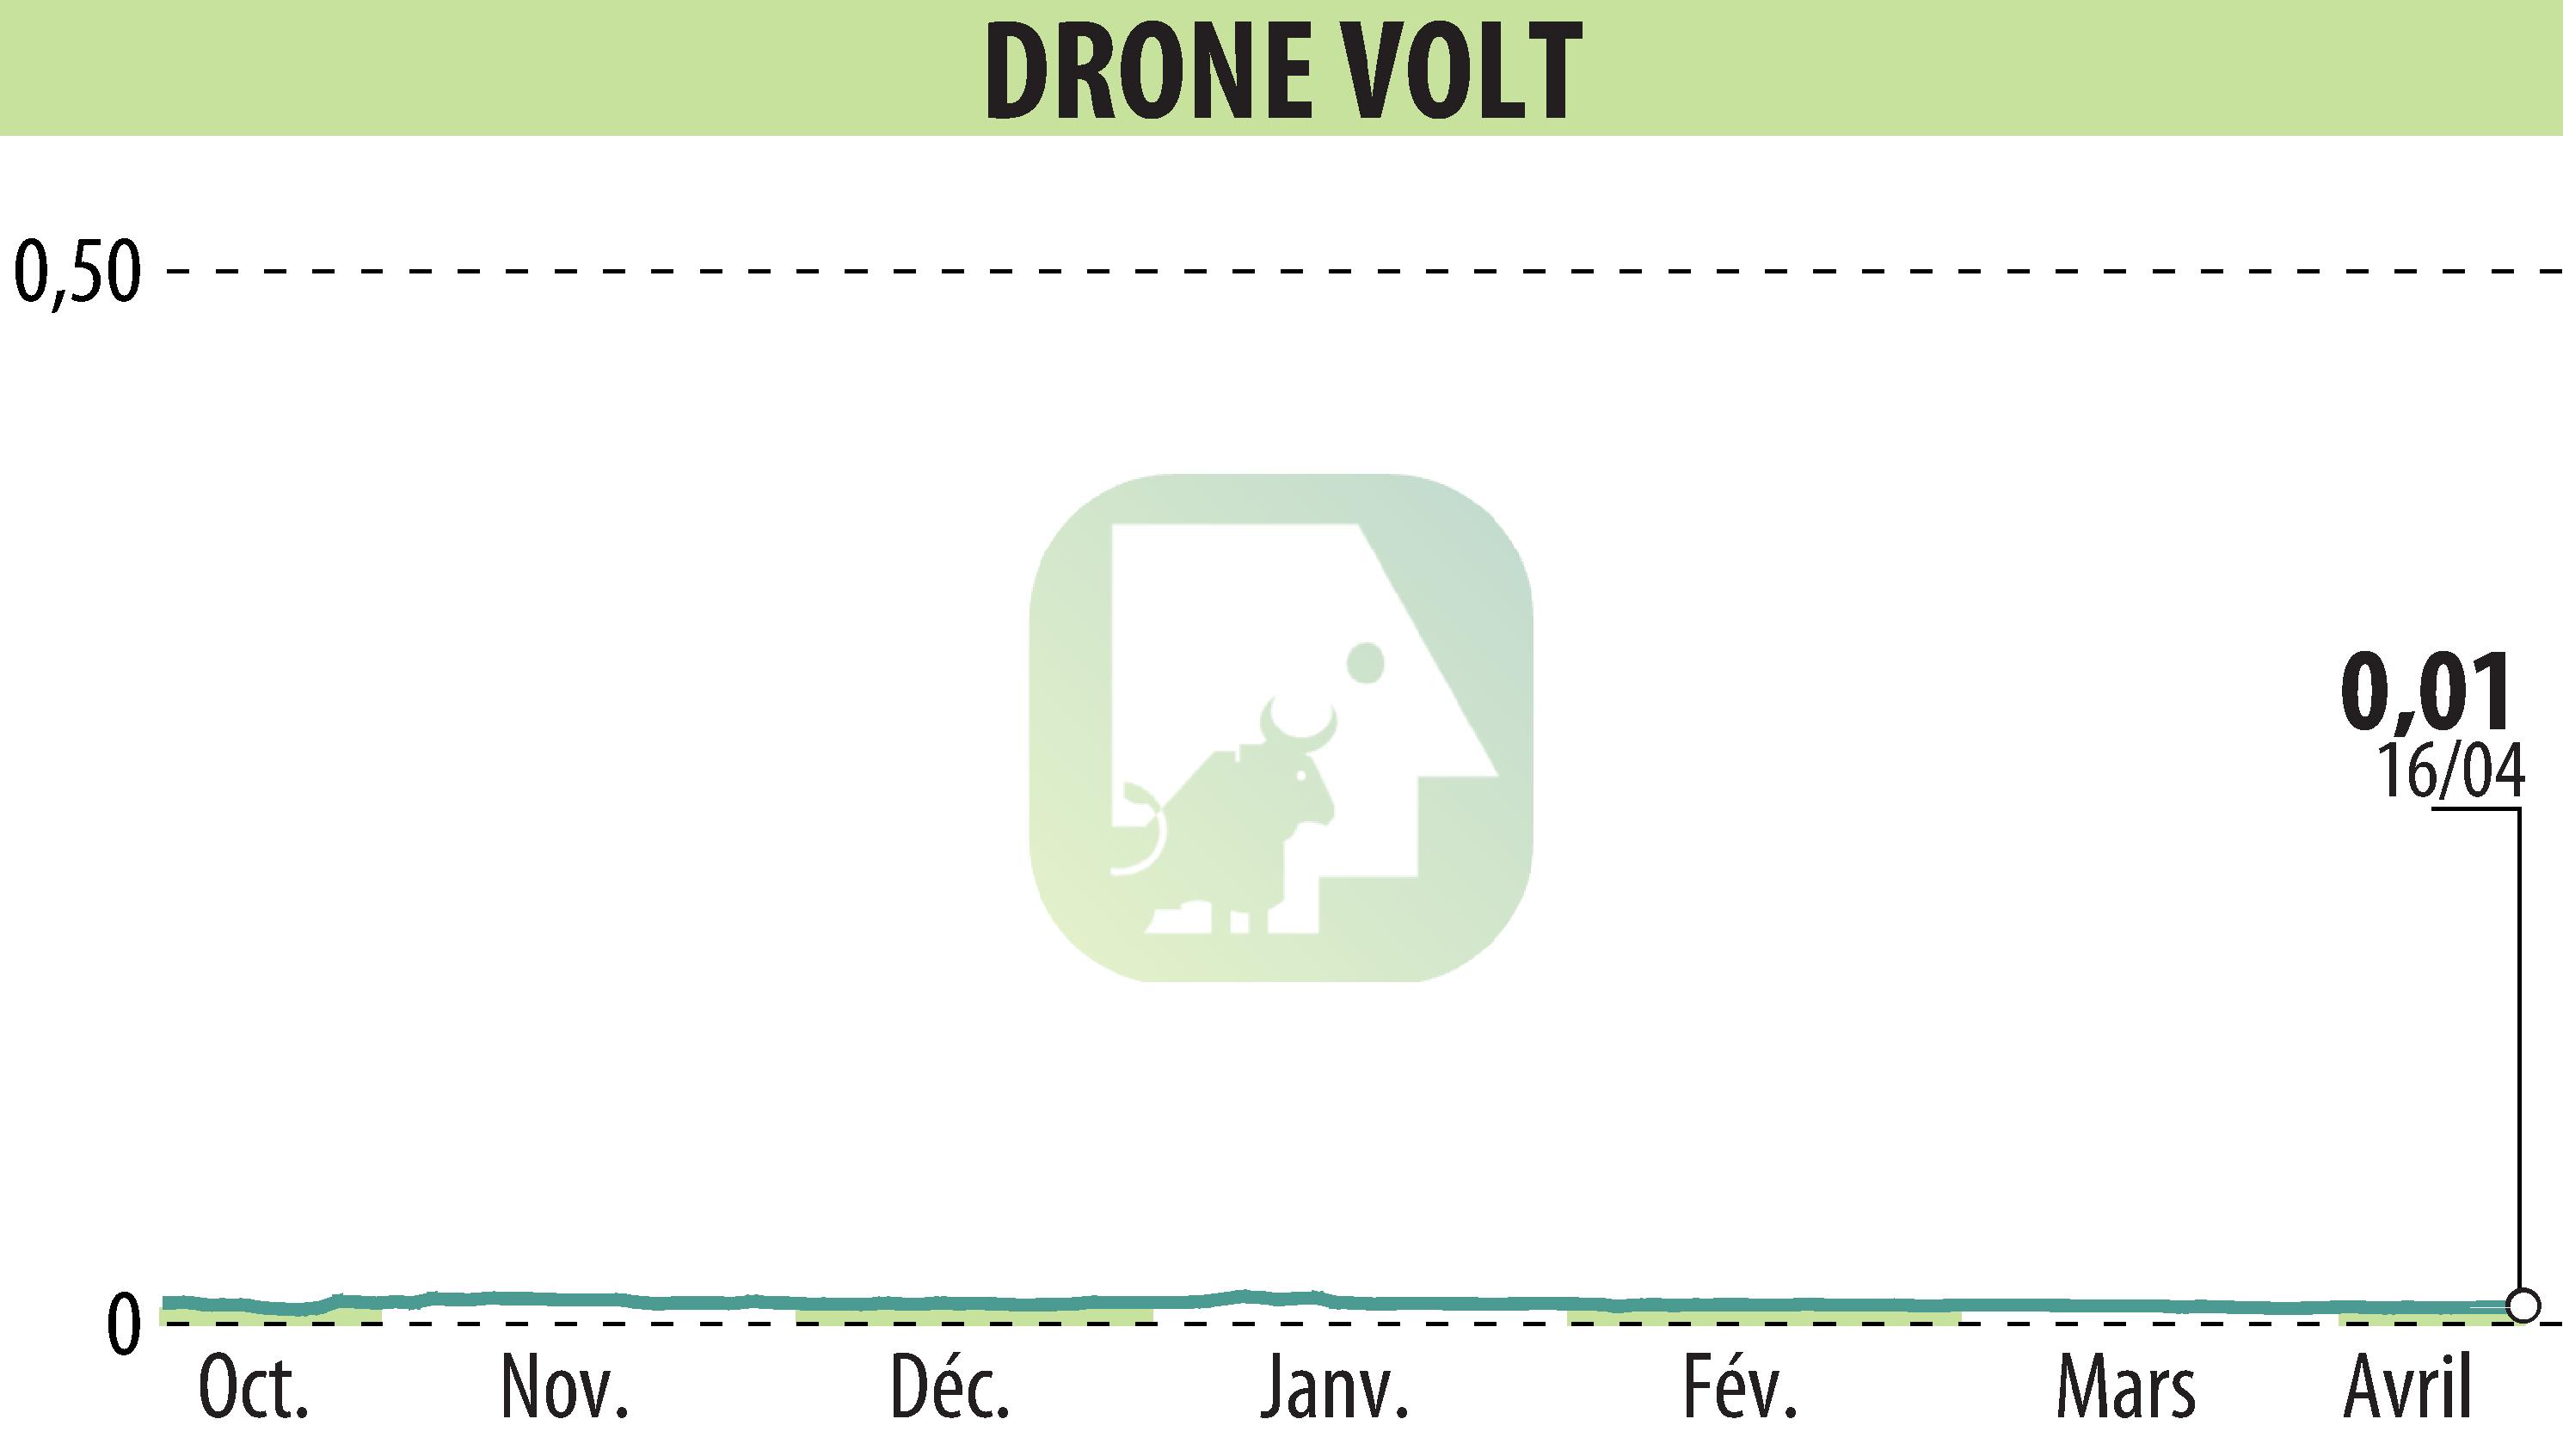 Stock price chart of DRONE VOLT (EPA:ALDRV) showing fluctuations.